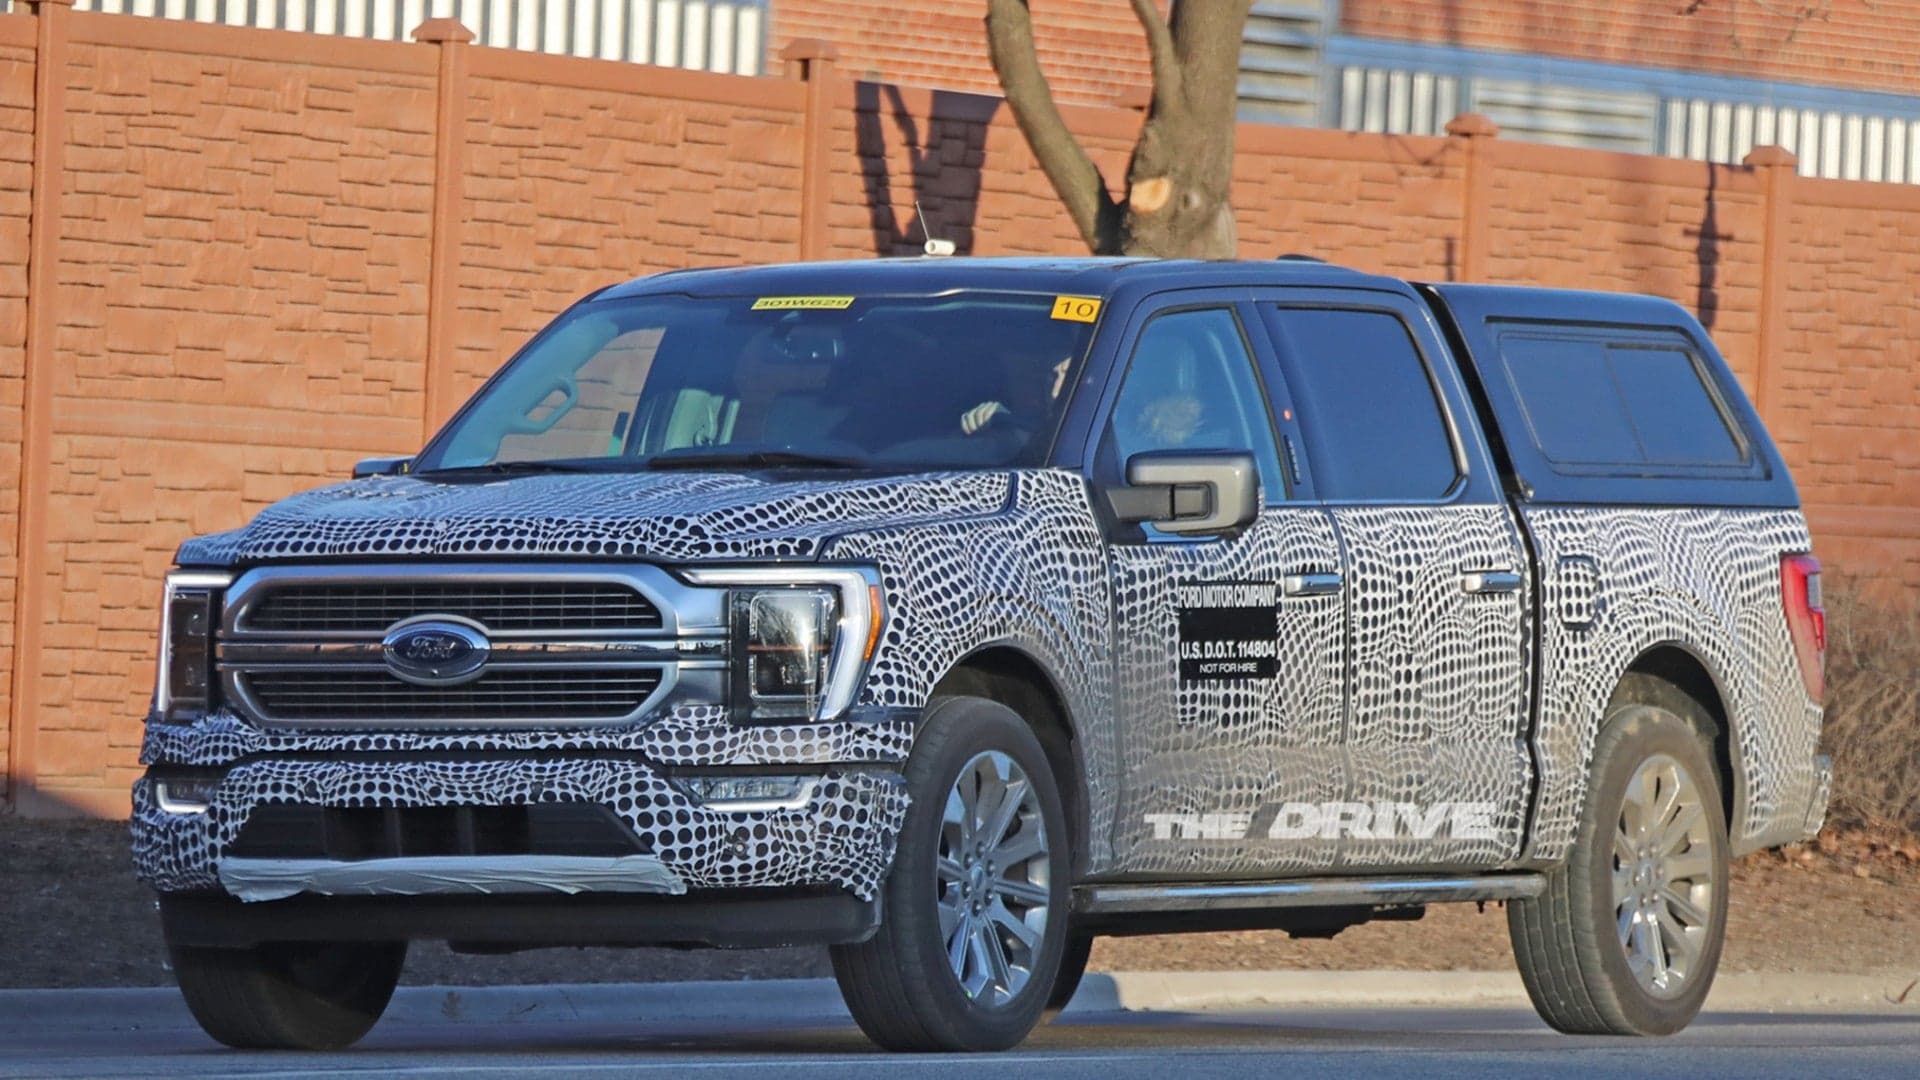 It’s Evolution Over Revolution for the All-New 2021 Ford F-150